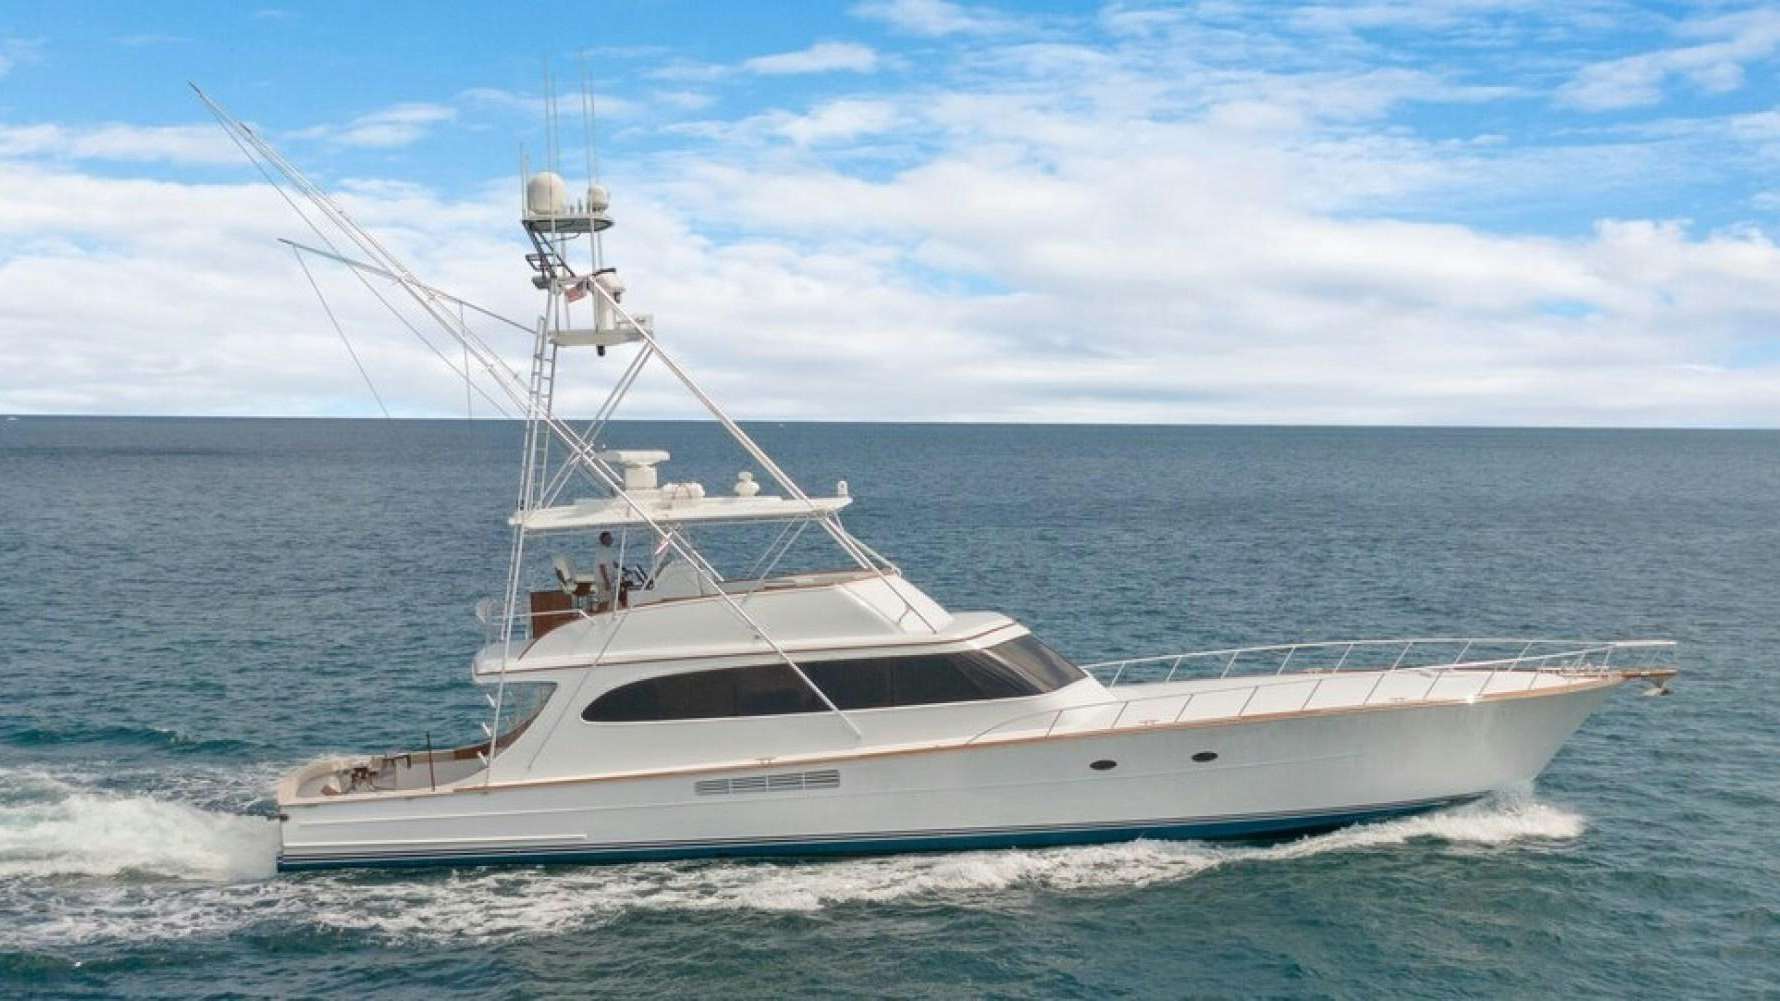 Watch Video for EL CHUPACABRA Yacht for Sale